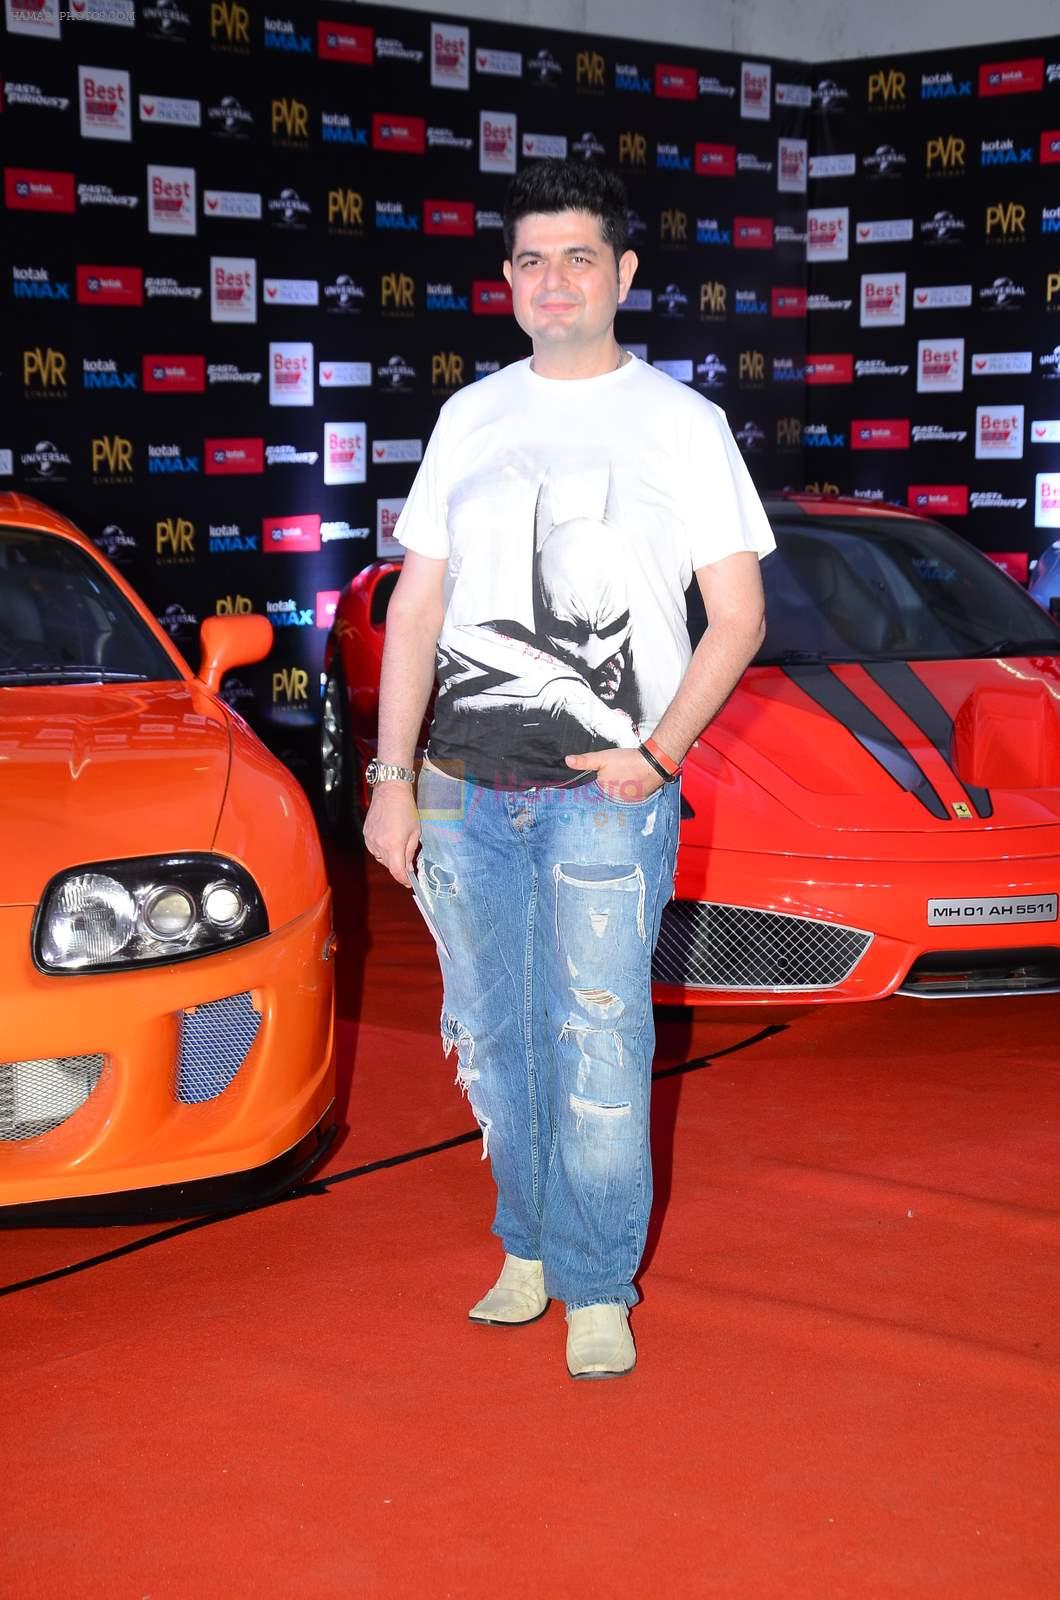 Dabboo Ratnani at the premiere of Fast N Furious 7 premiere in PVR, Mumbai on 1st April 2015